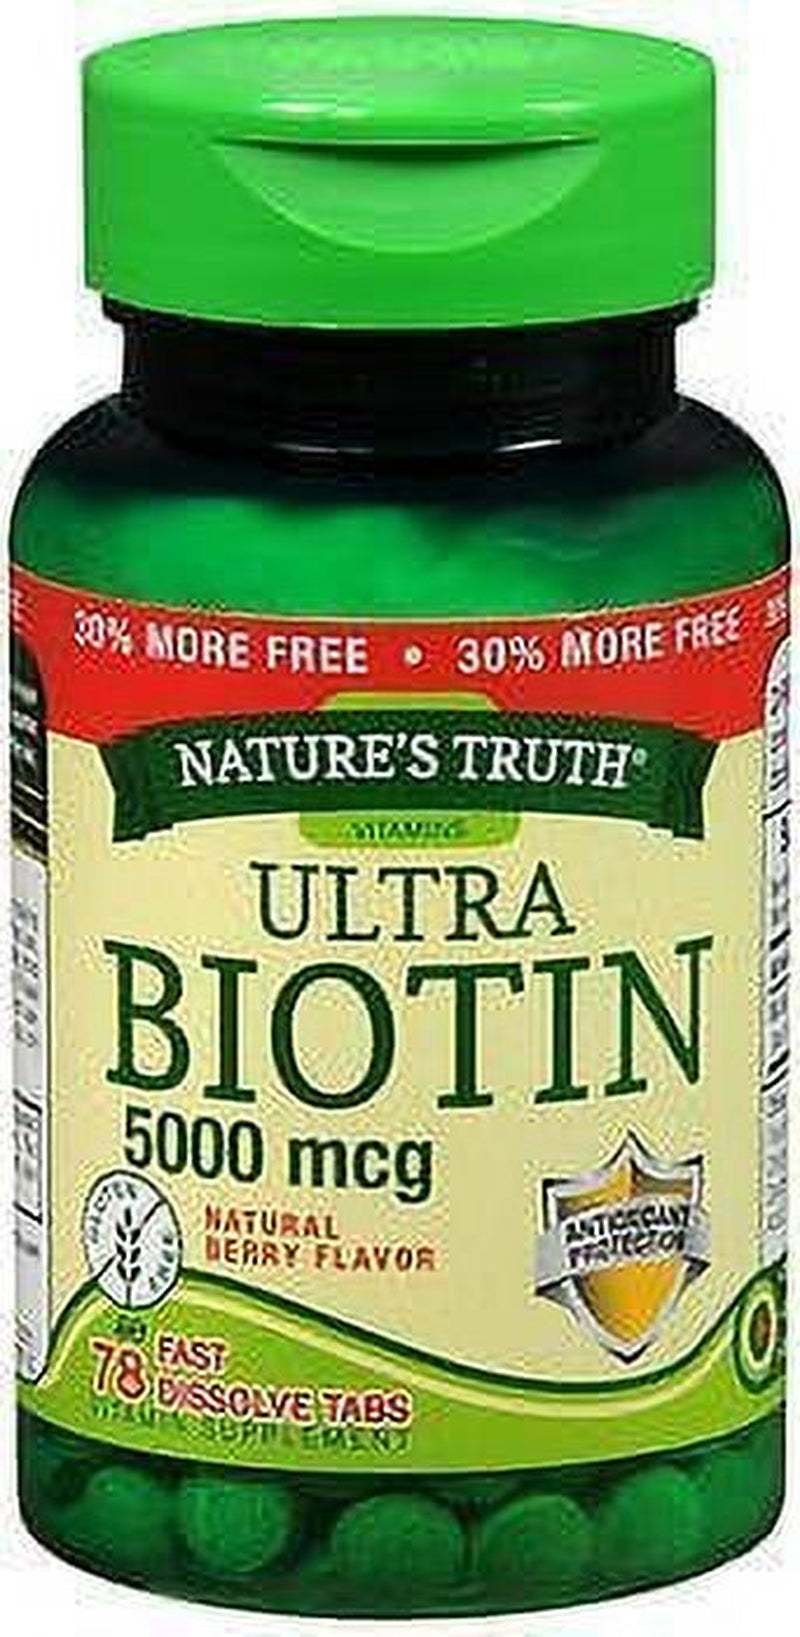 Natures Truth Ultra Biotin Fast Dissolve Tablets Natural Berry Flavor (Pack of 24)